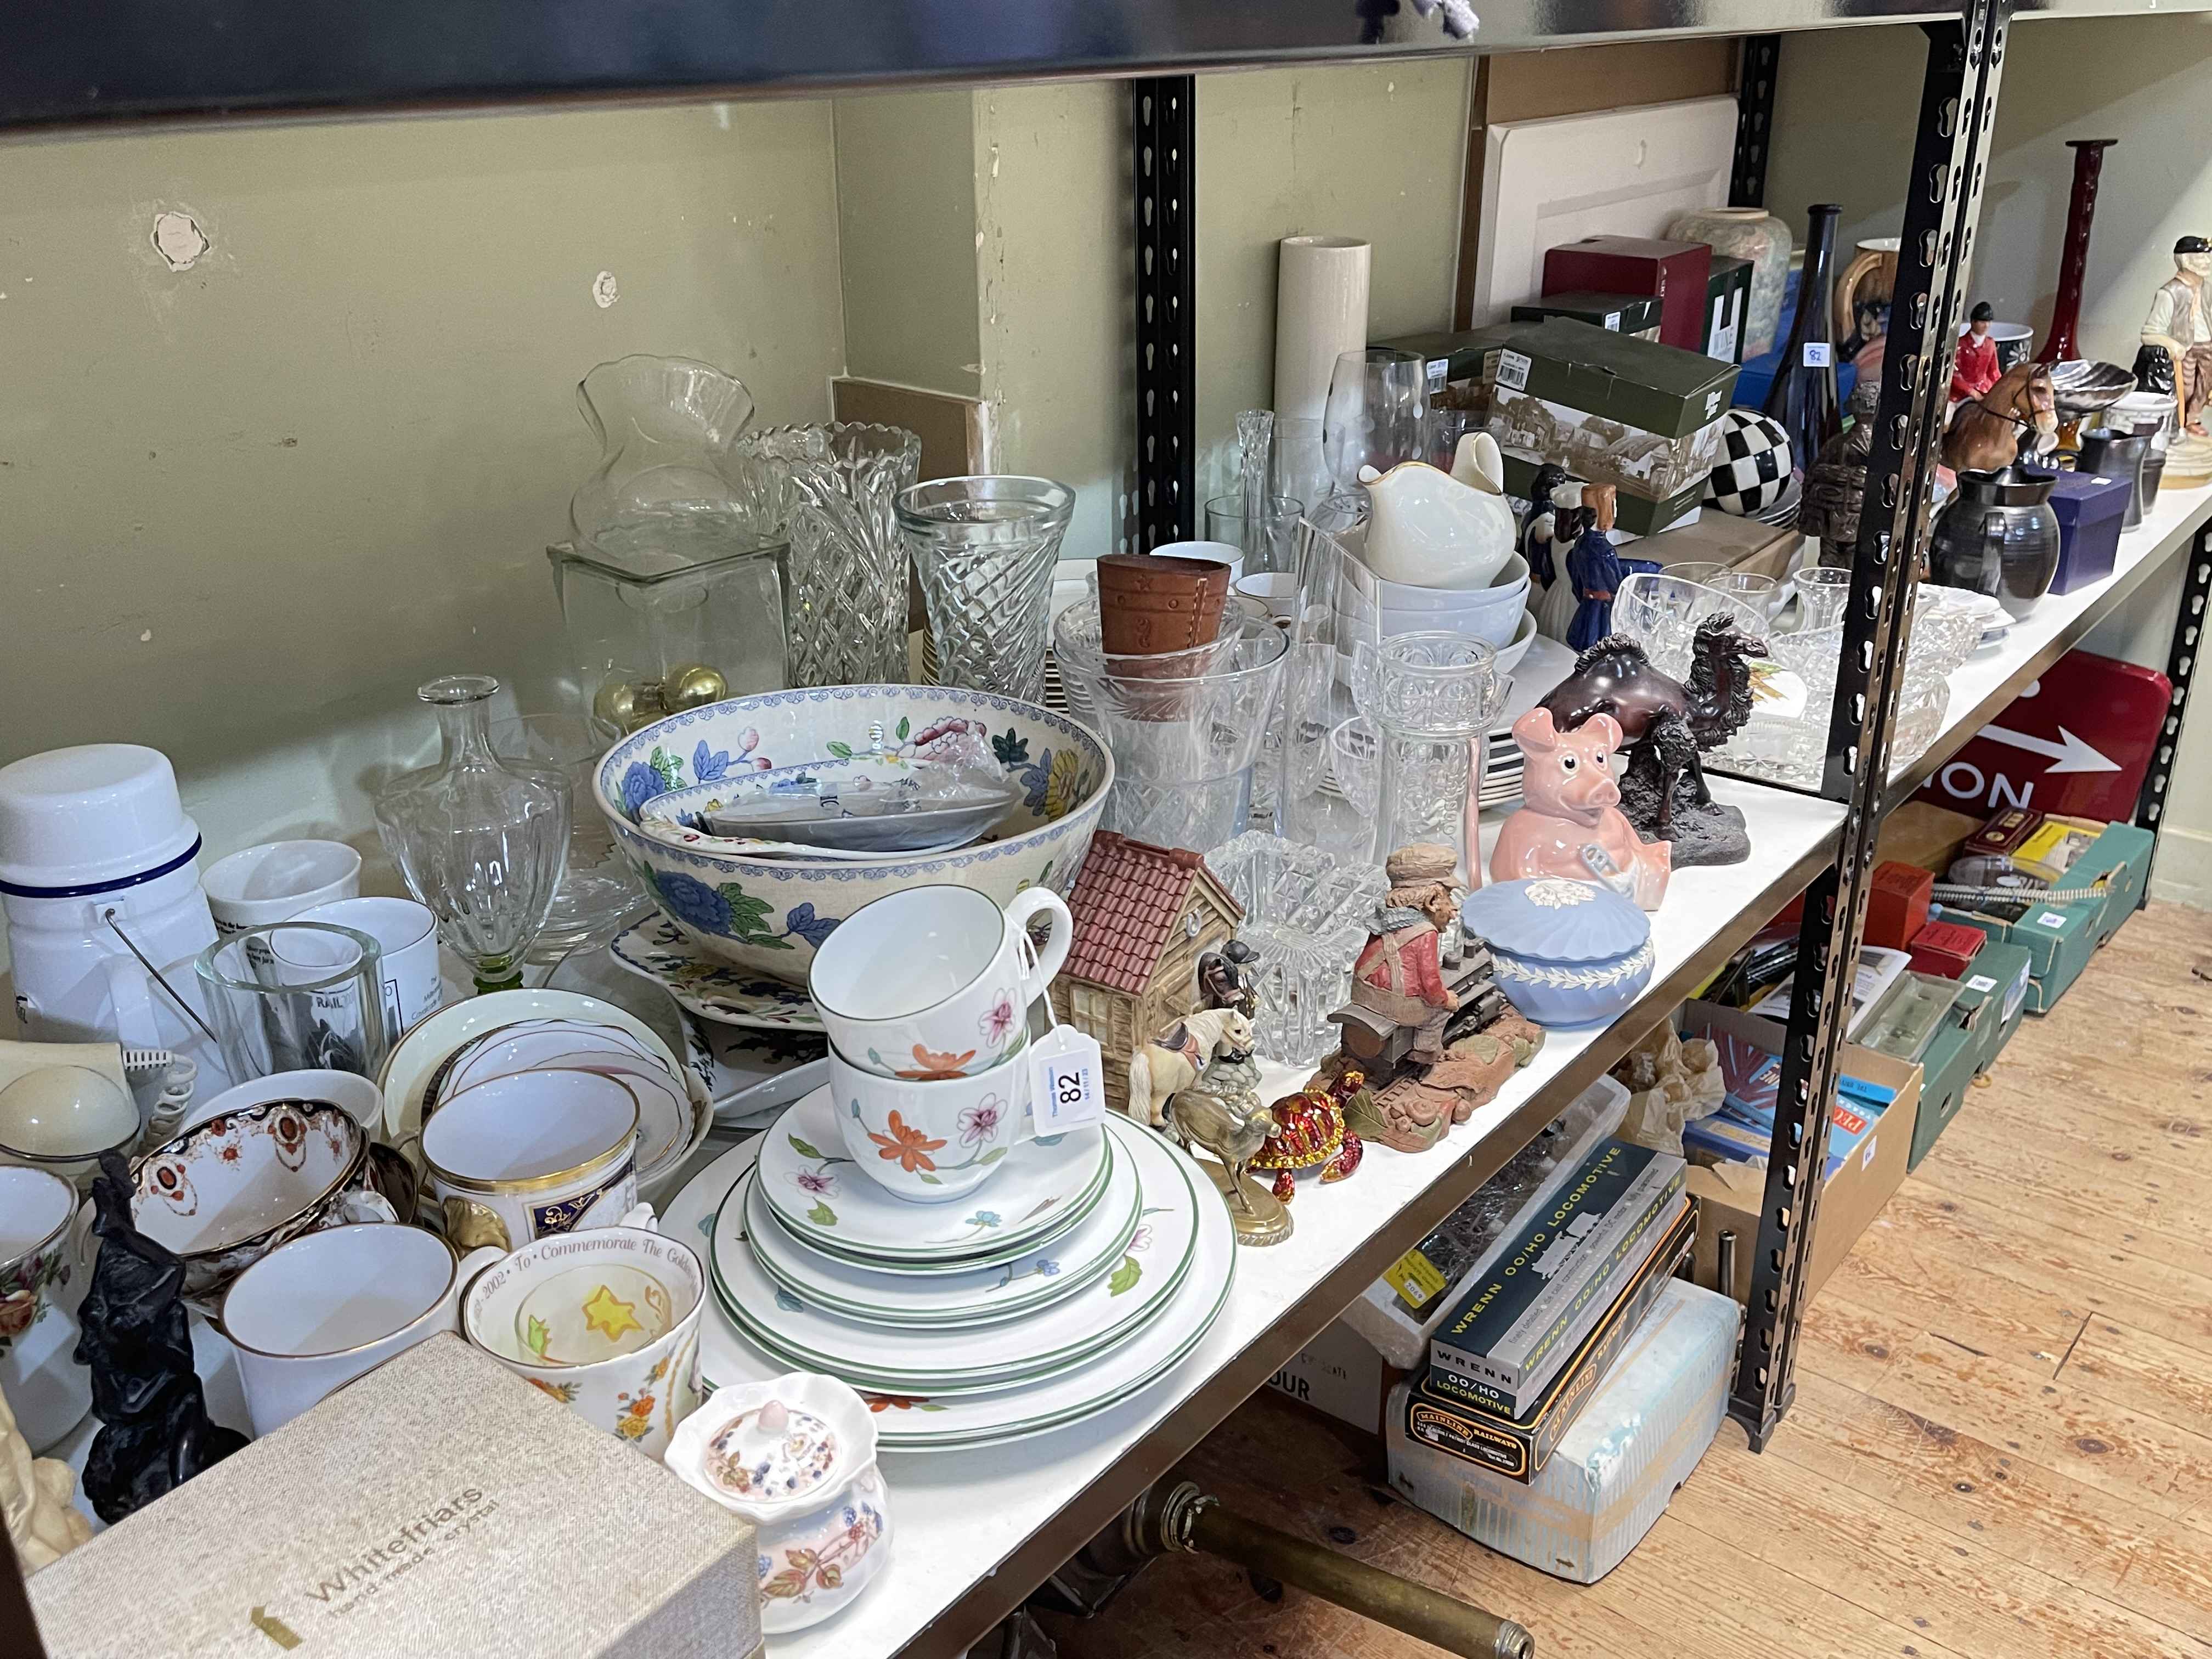 Large collection of china and glass including Lilliput Lane, Masons, Royal Doulton dinnerware.